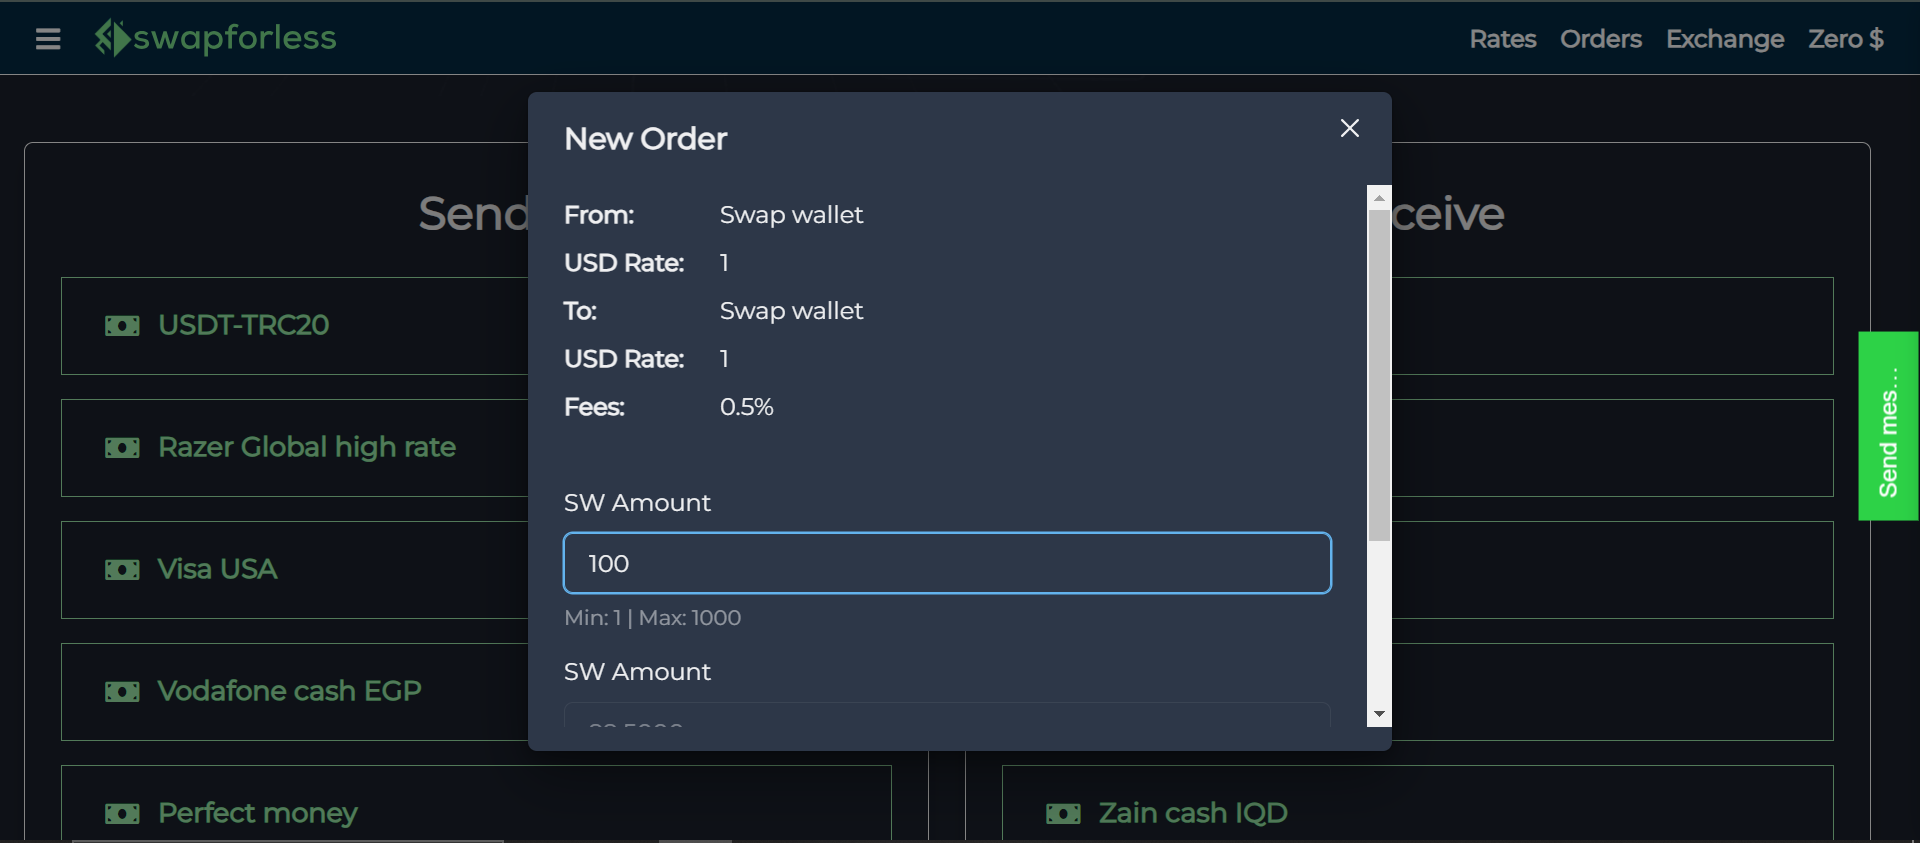 How to transfer from one Swap wallet to another Swap wallet